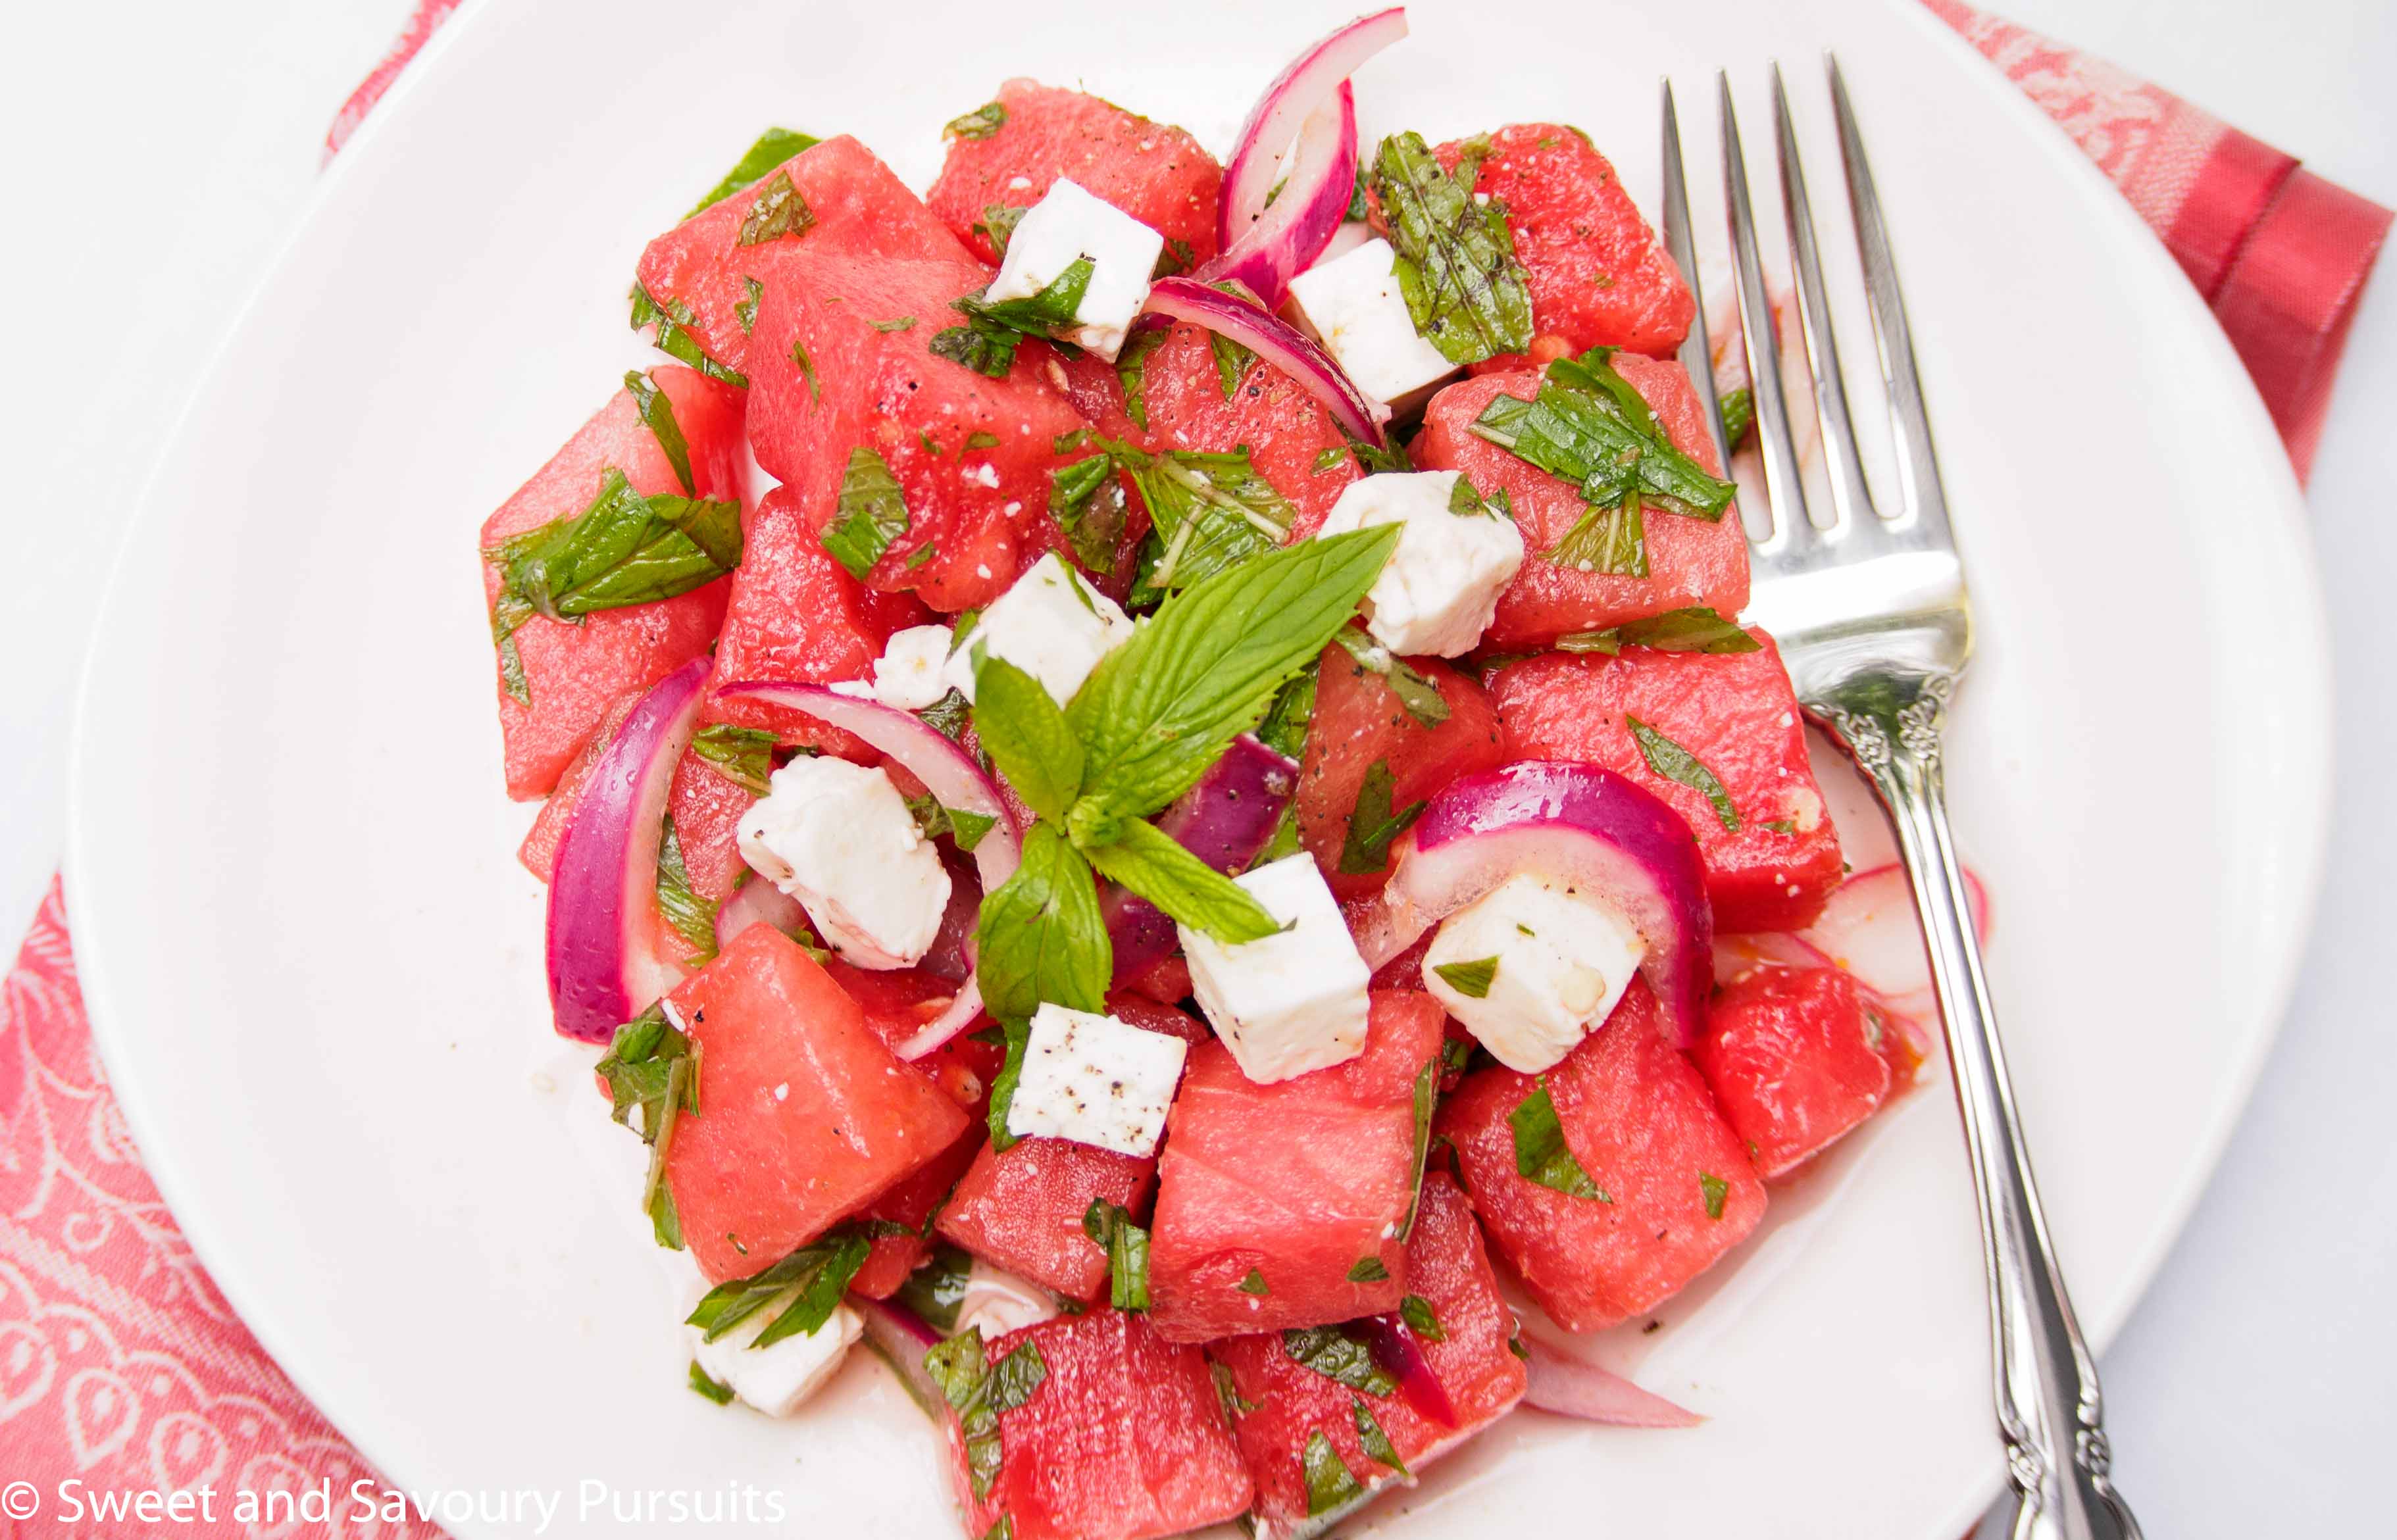 Watermelon Feta Salad topped with fresh mint and served on dish.